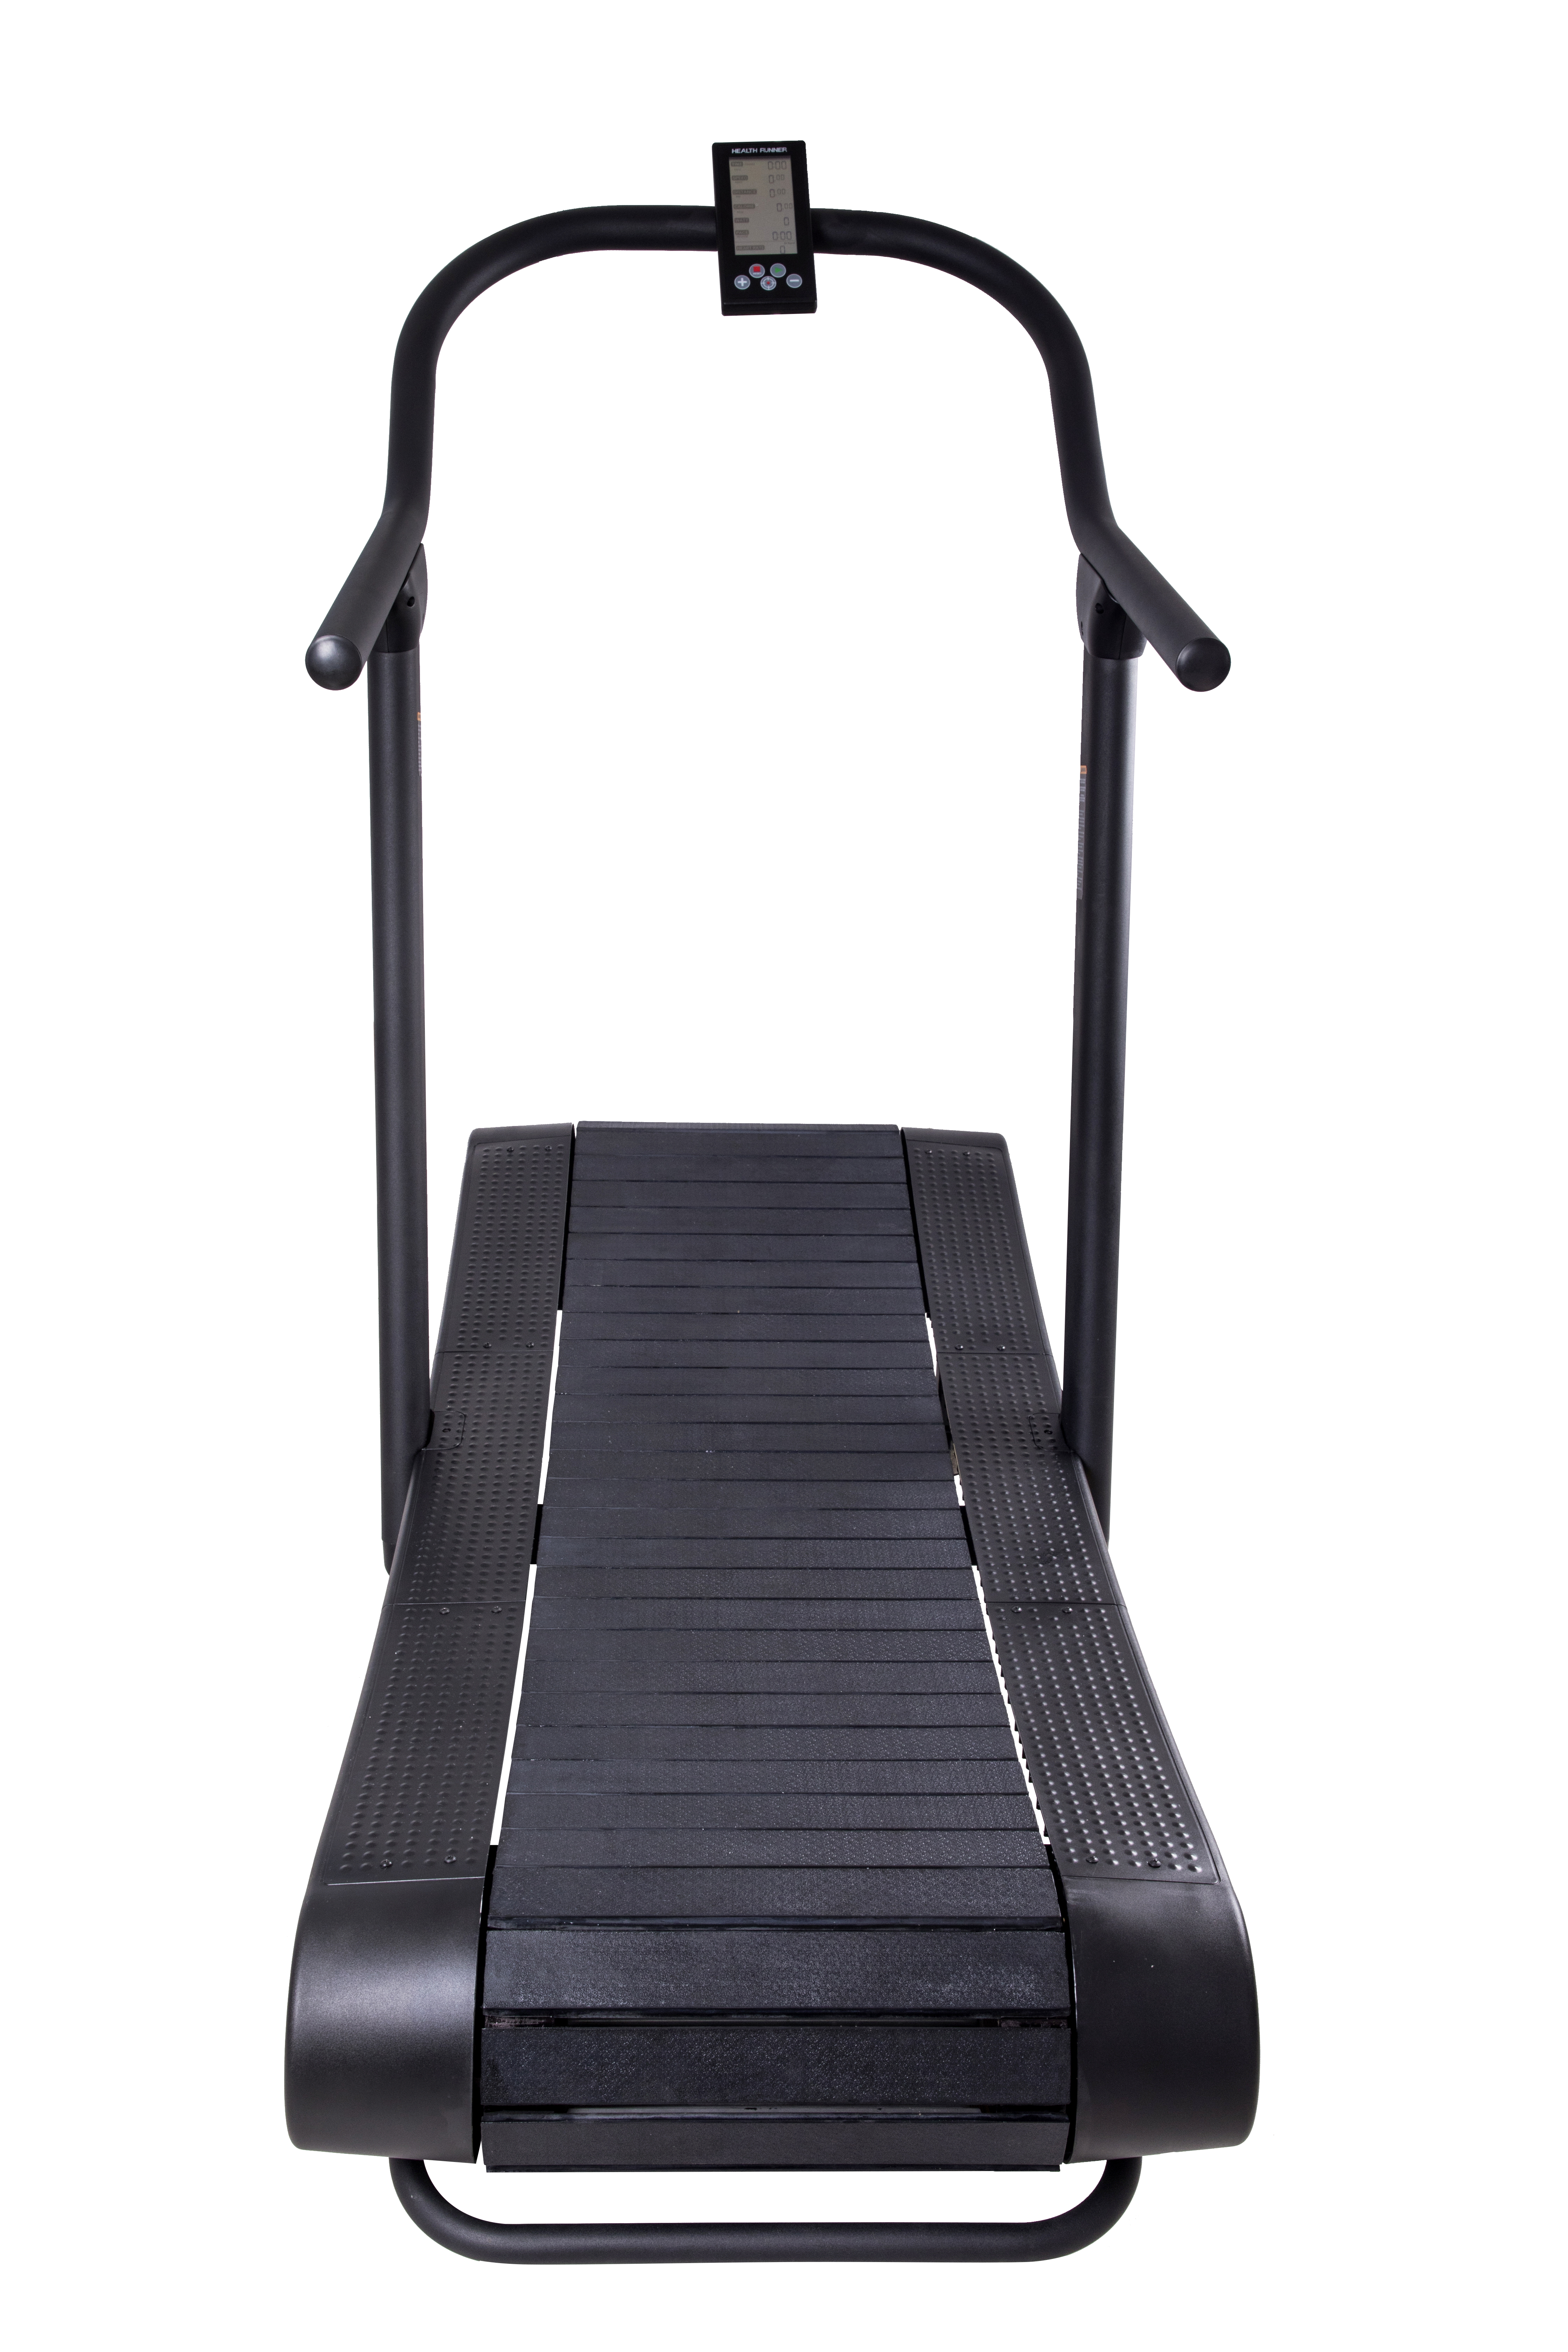 Non Motorized Durable Community Commercial Curved Treadmill